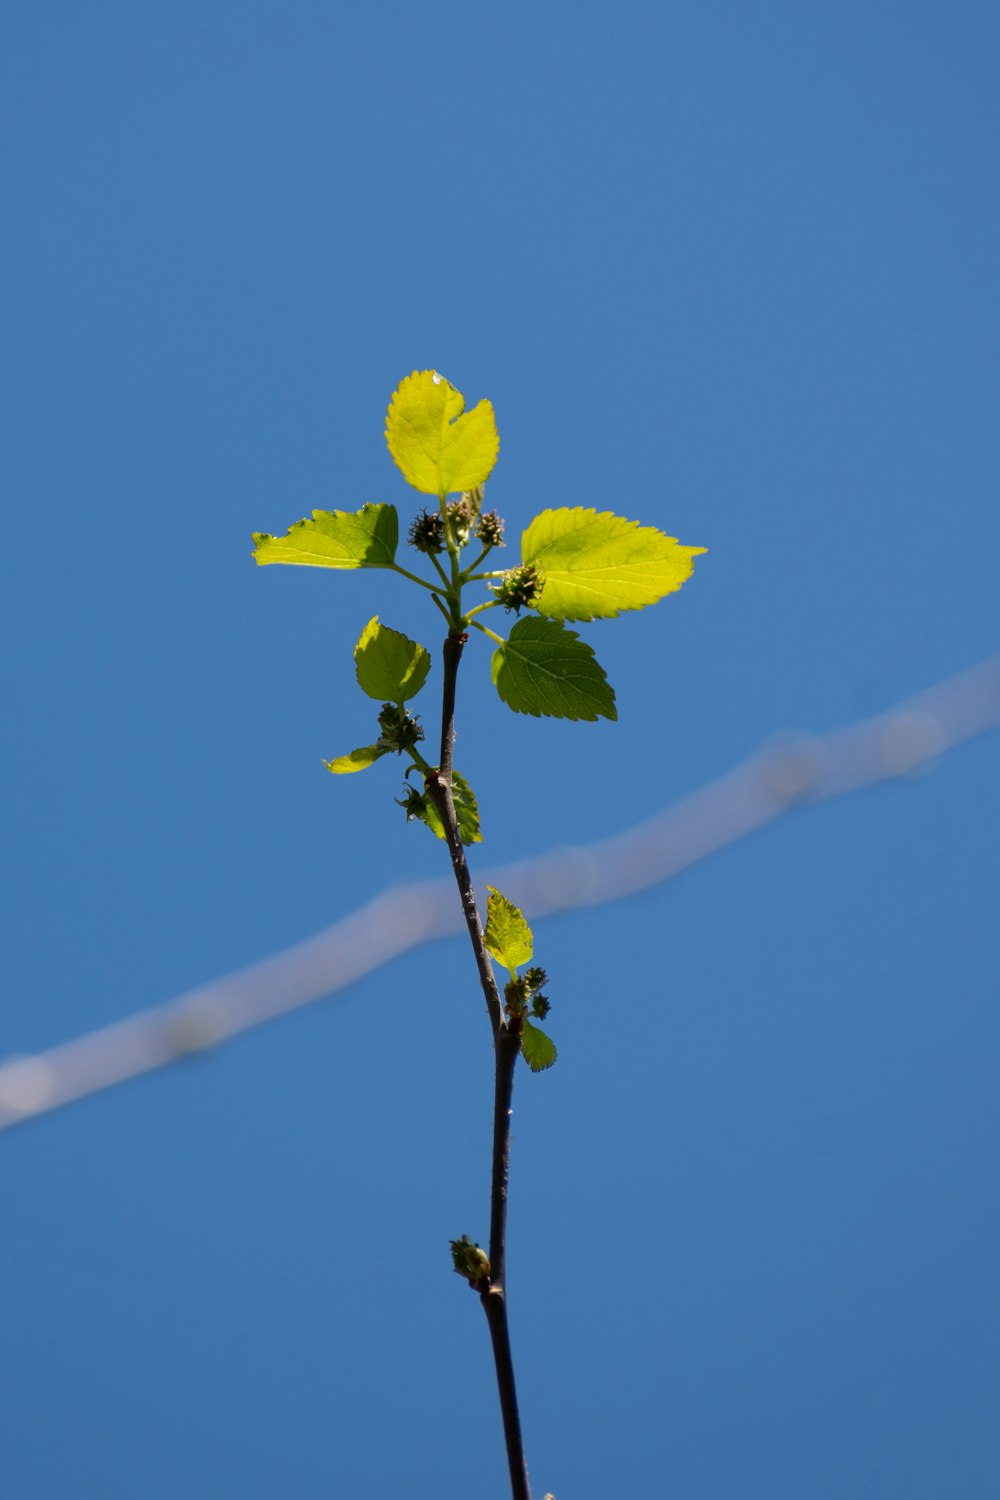 a small branch with green leaves against a blue sky